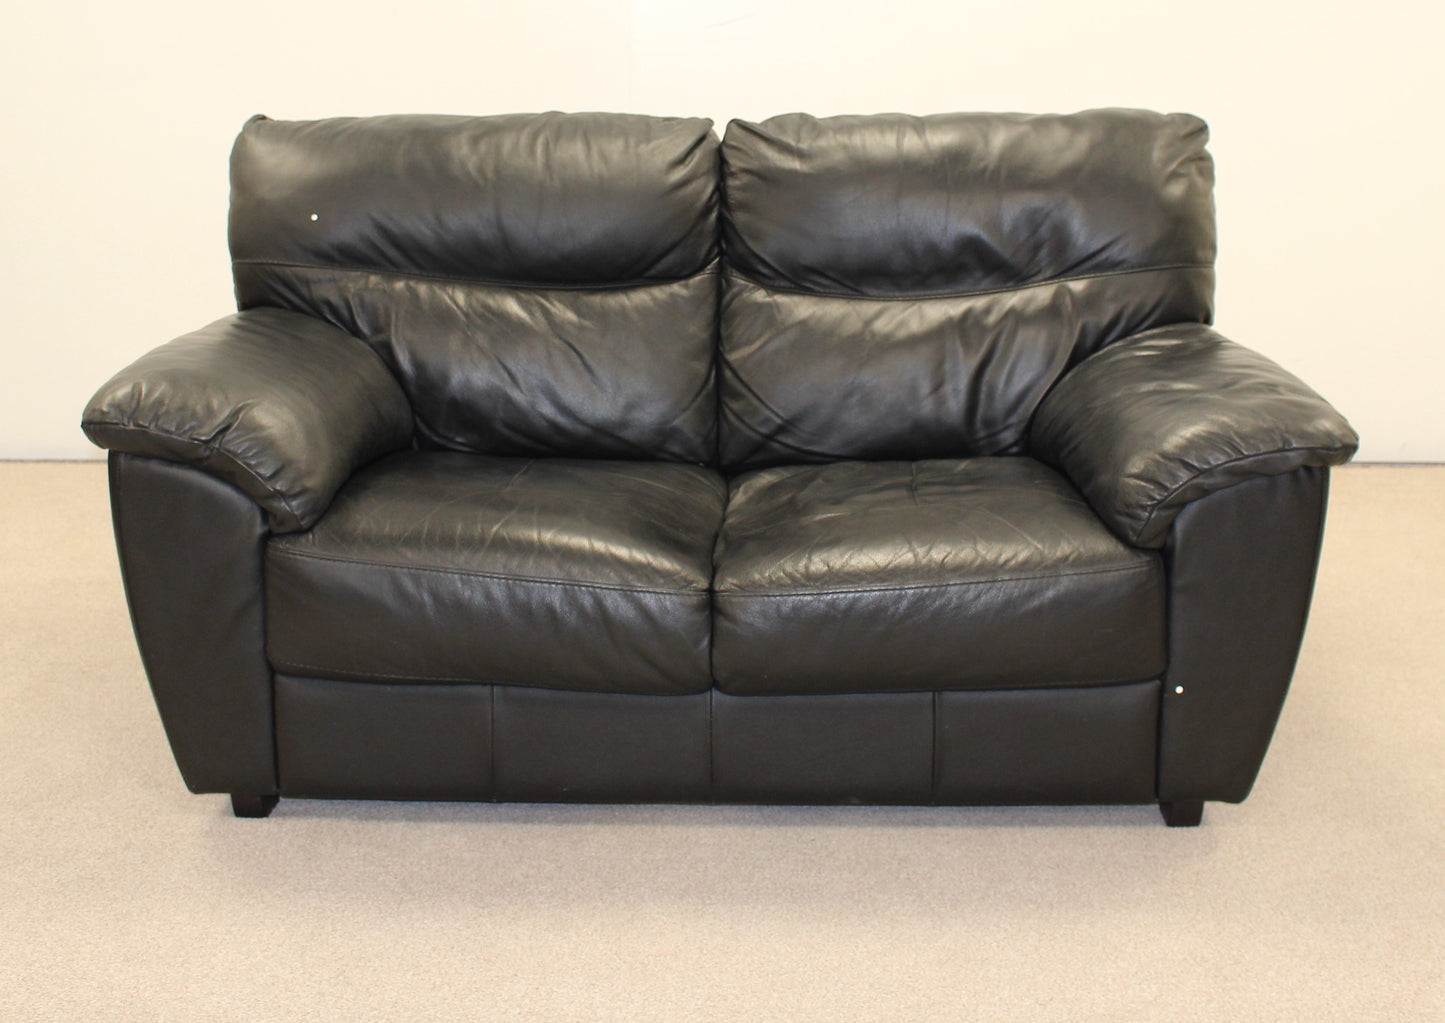 Two Seater Leather Sofa